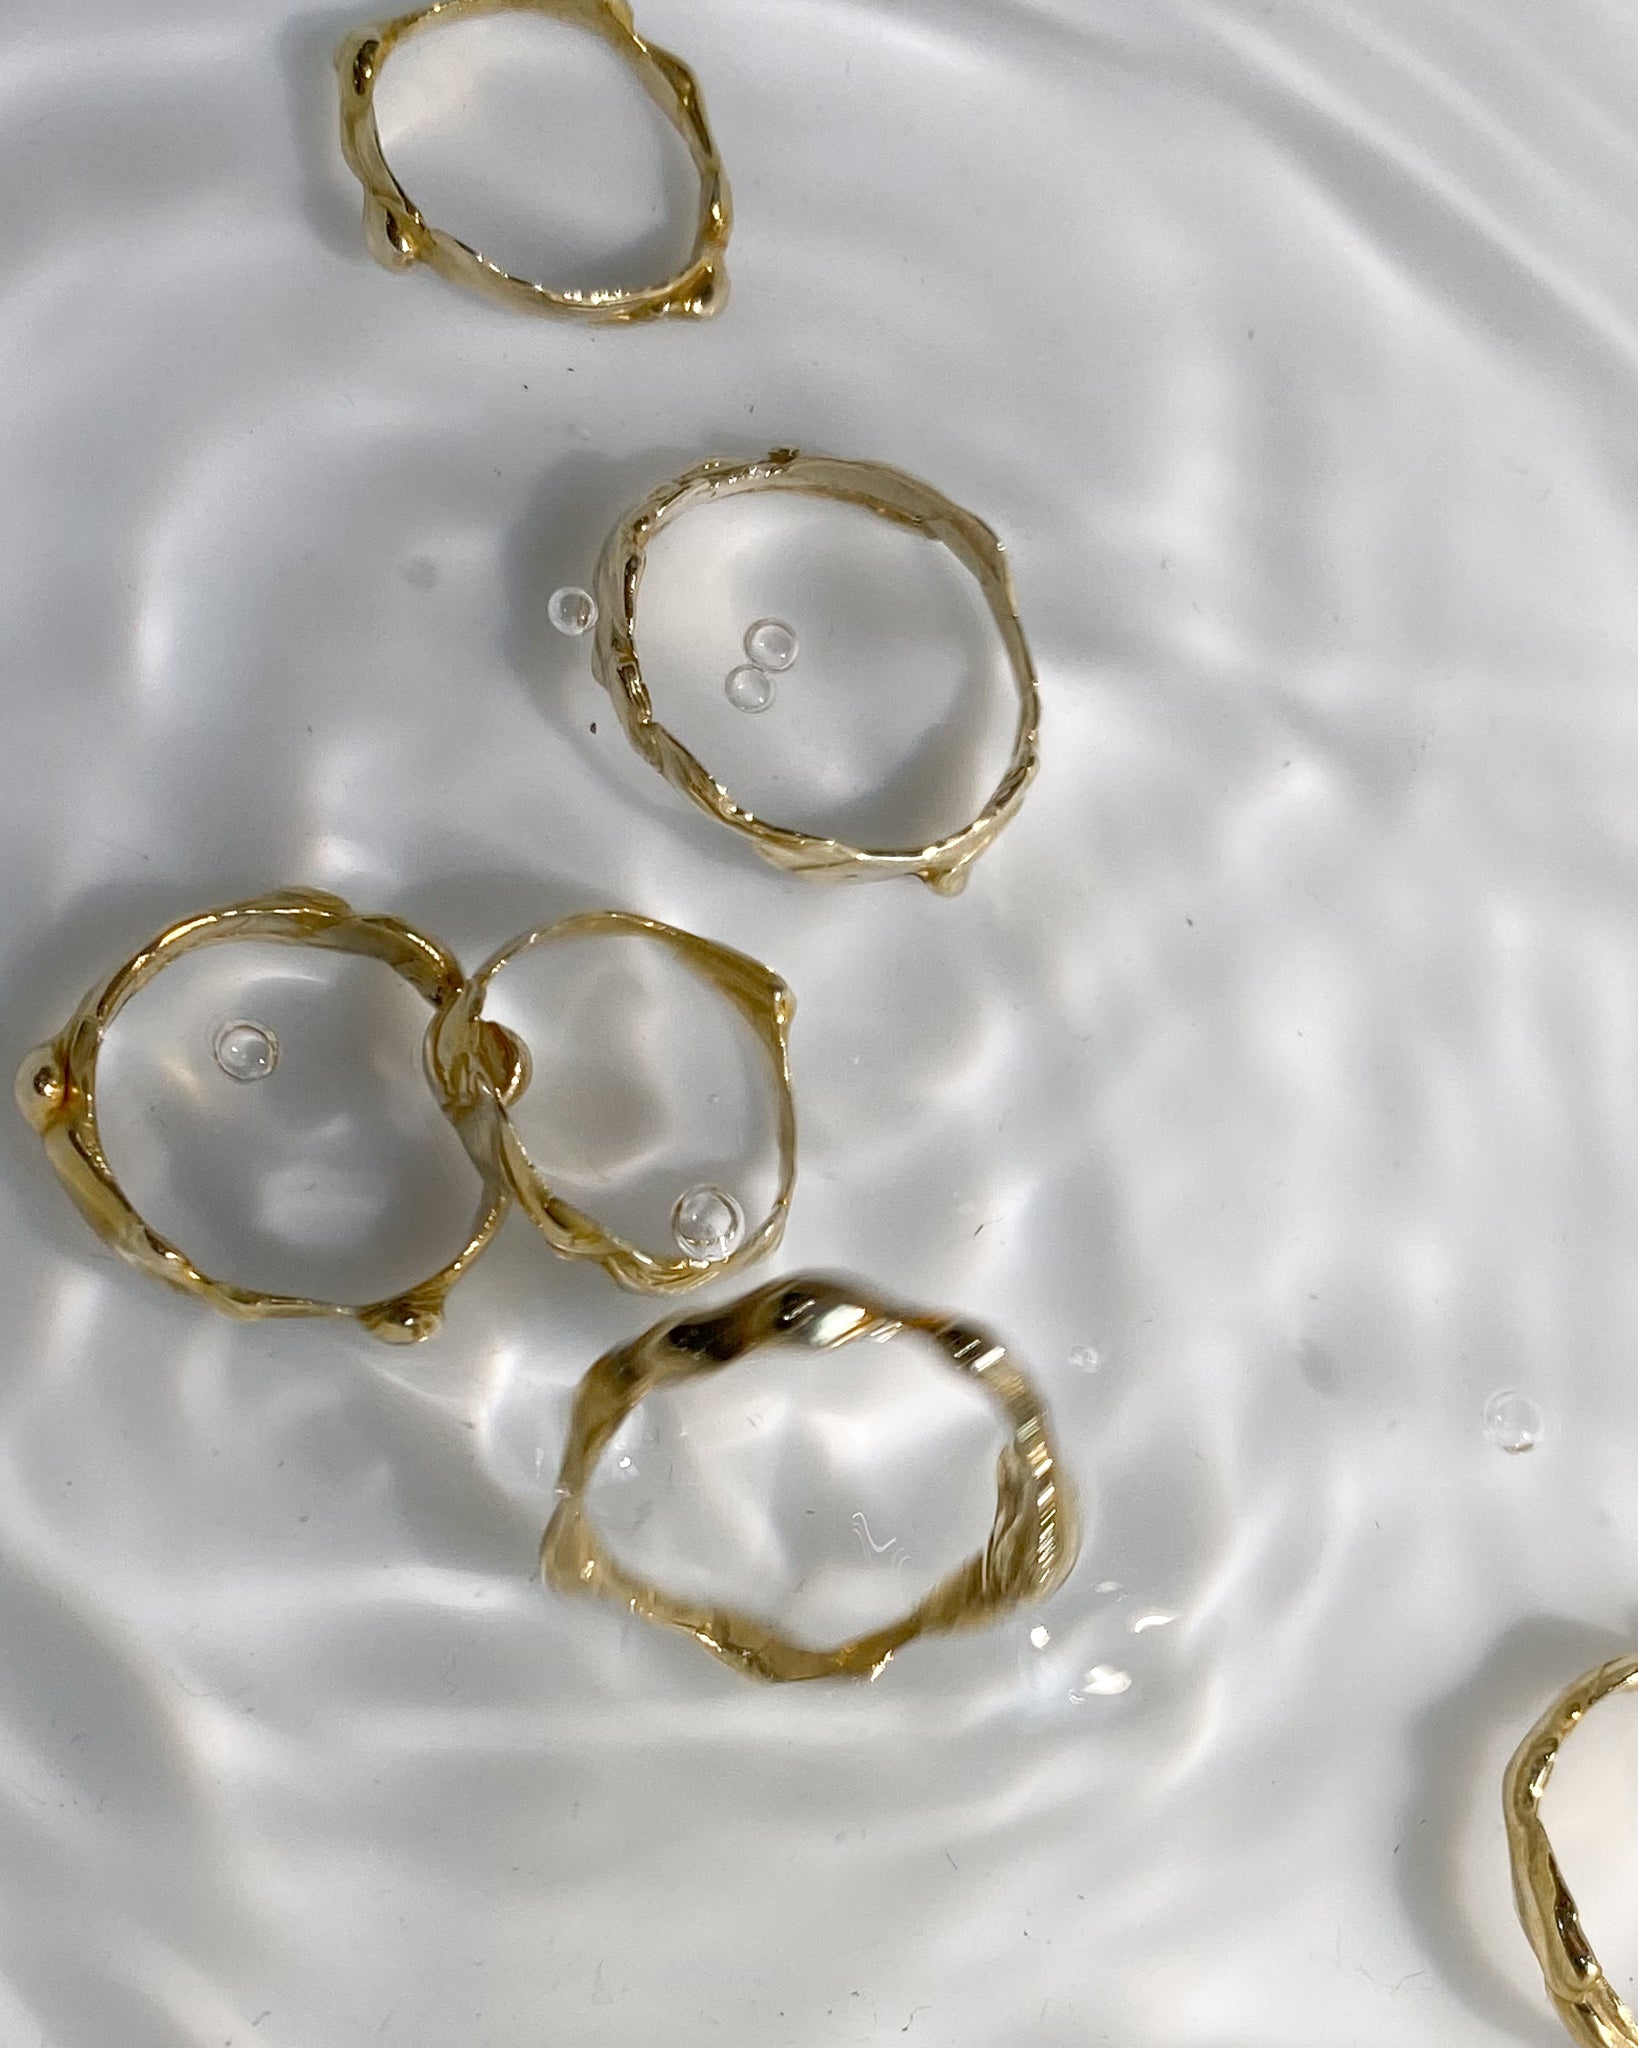 6 gold molten rings in water